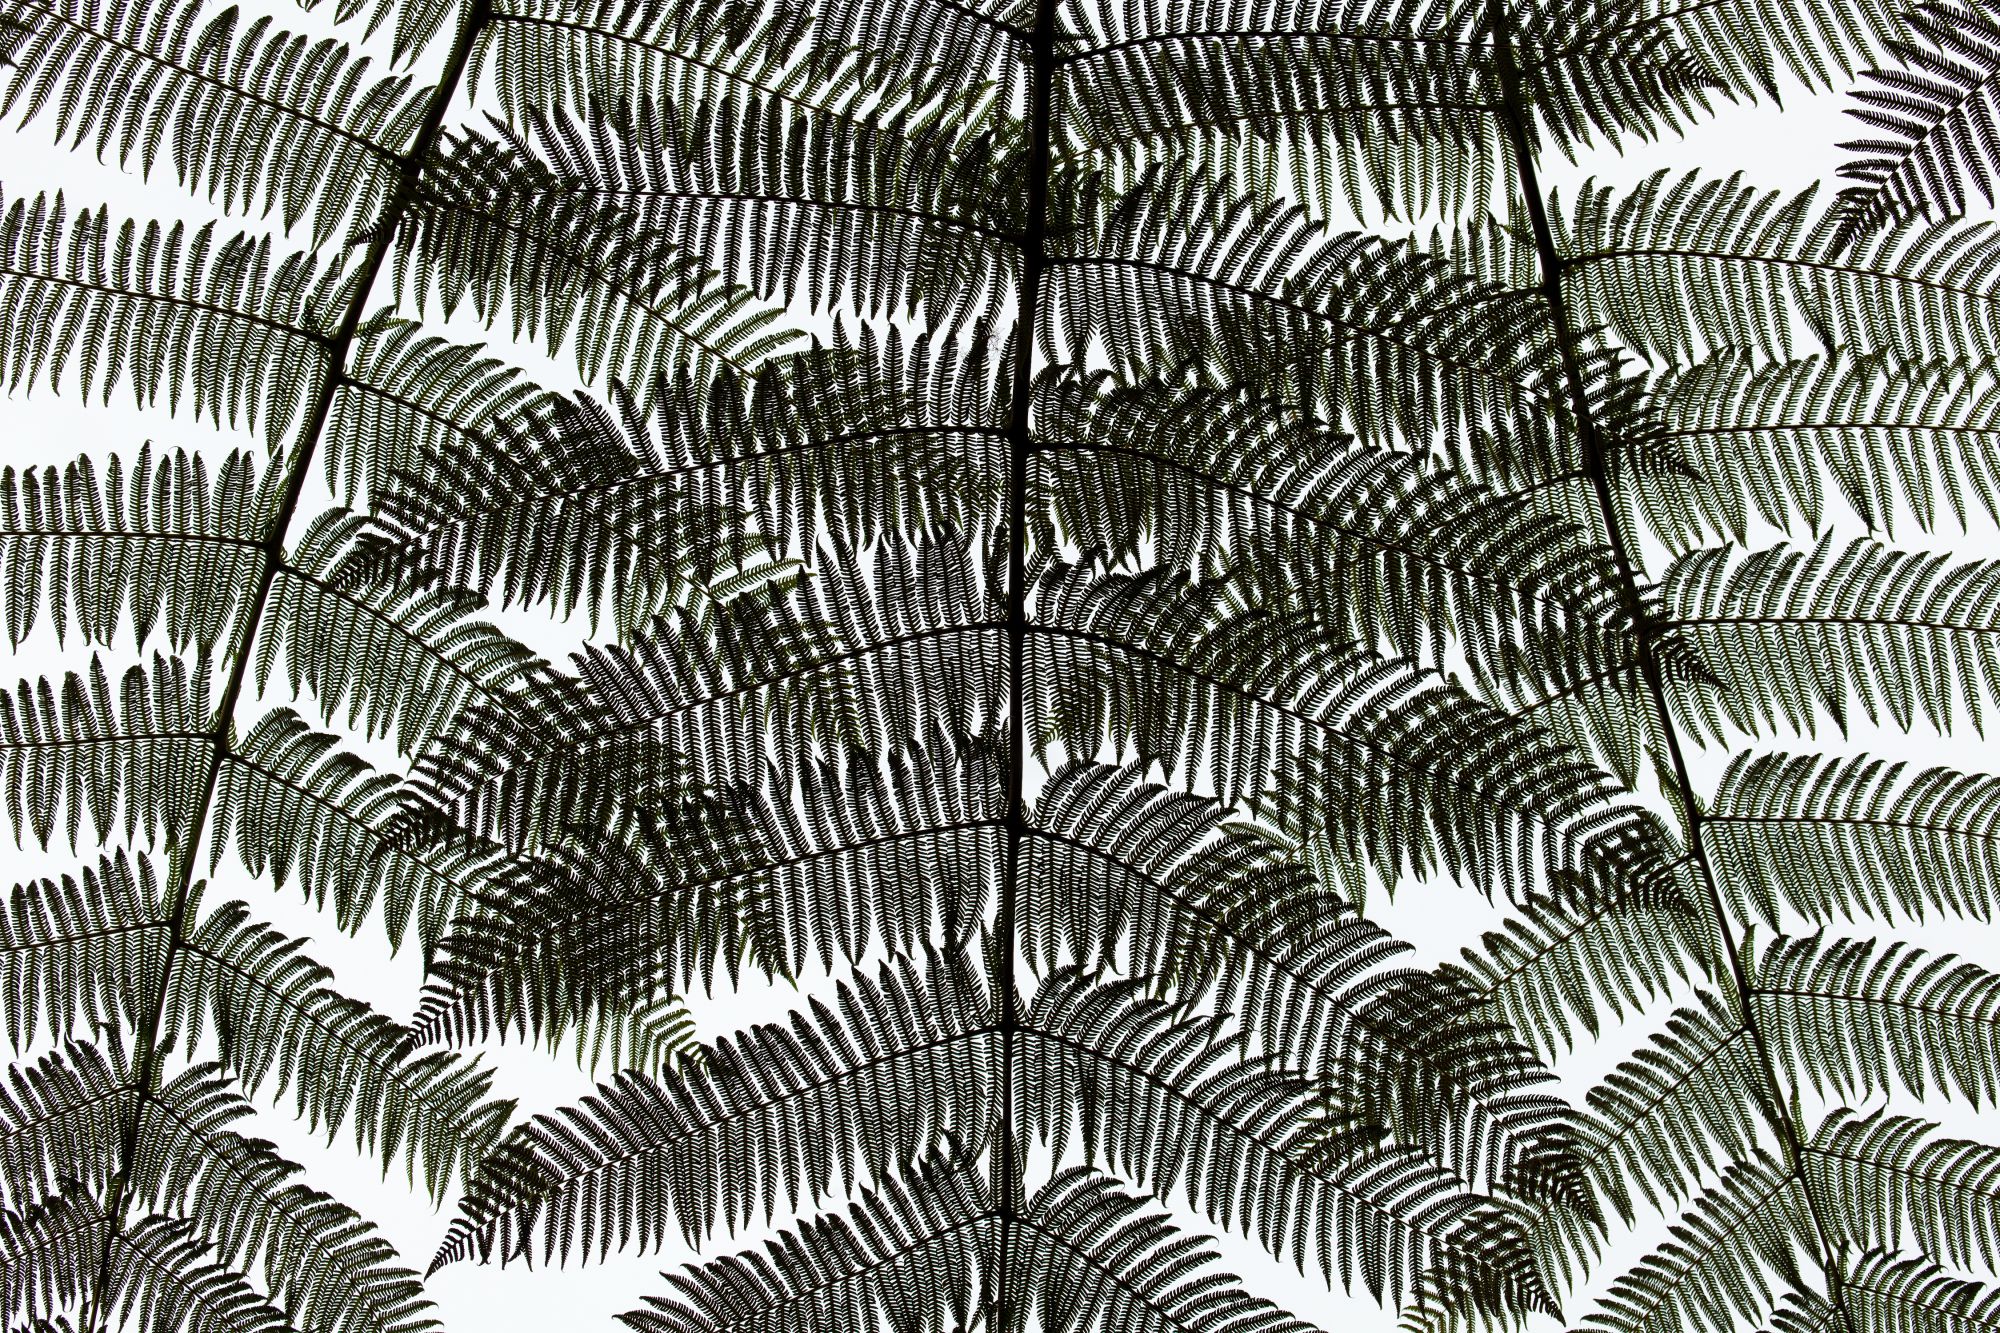 Detail of the leaves of a Fern tree